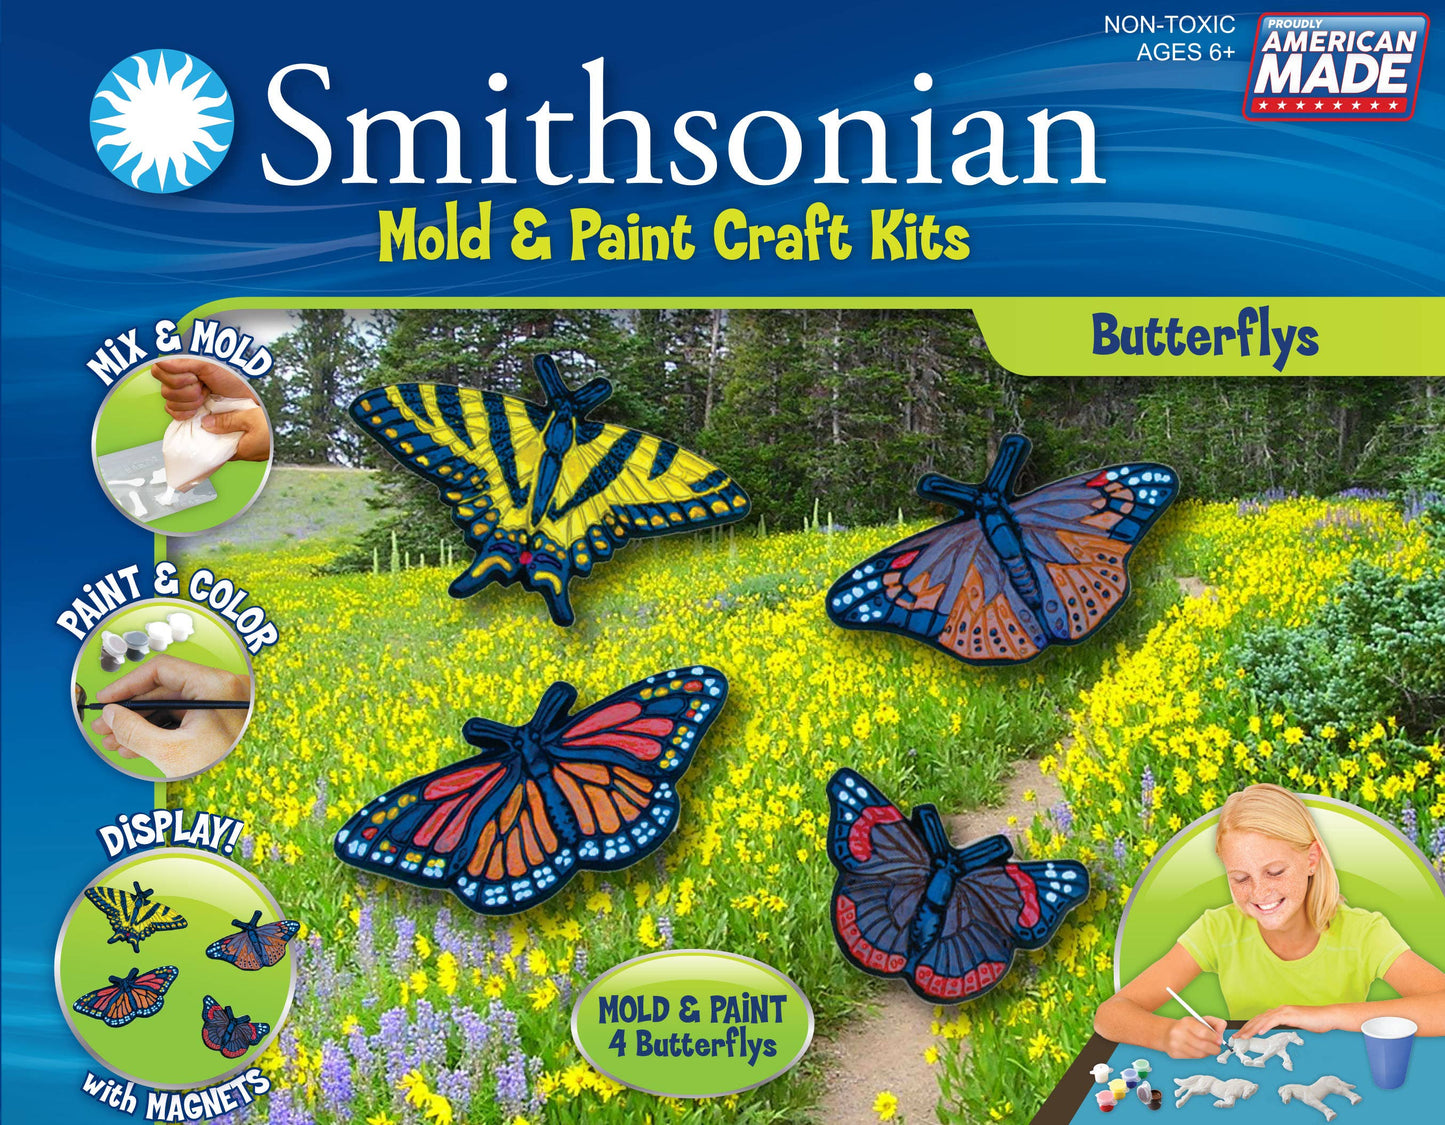 Smithsonian Mold and Paint Kit - Butterfly